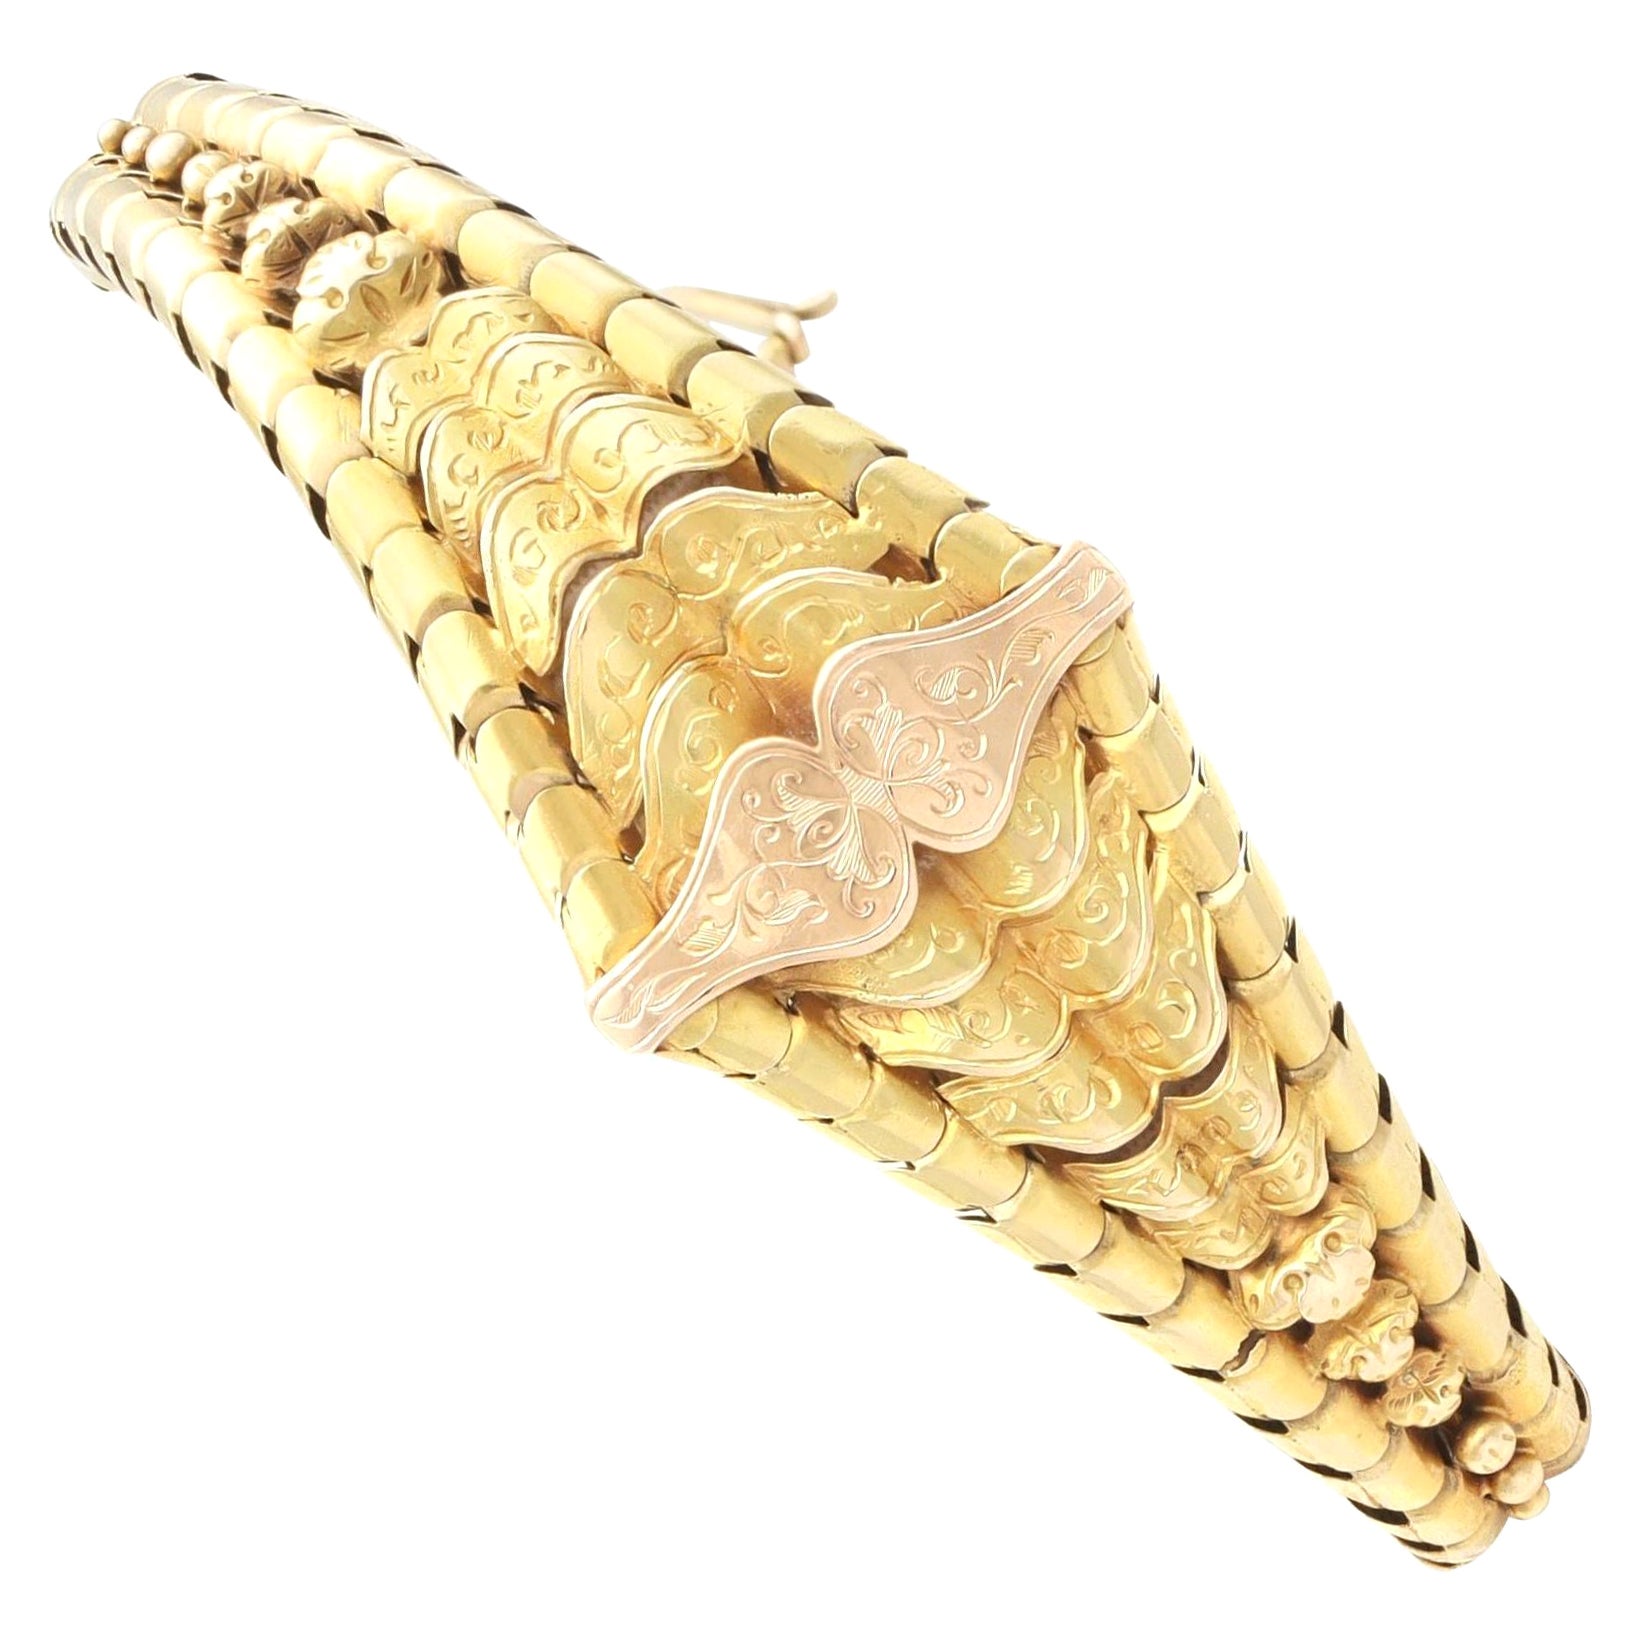 Antique 18k Yellow Gold Bracelet by Hunt & Rosell